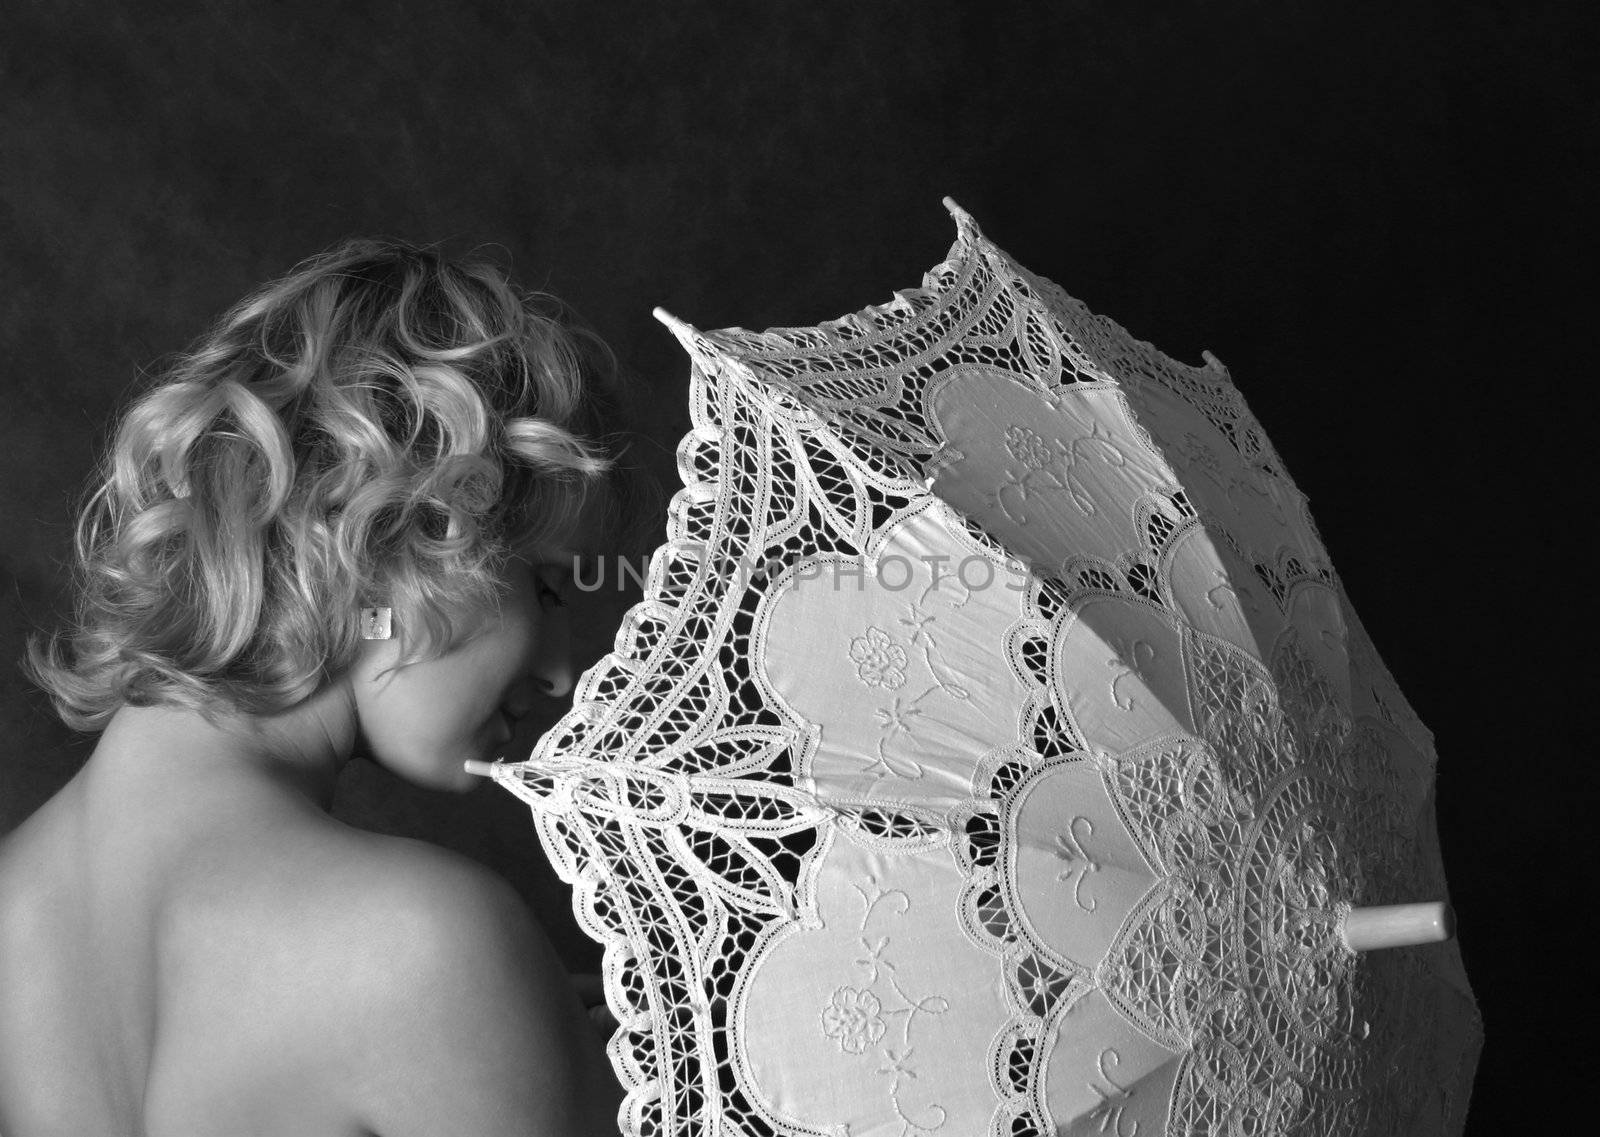 The beautiful woman with a lacy umbrella